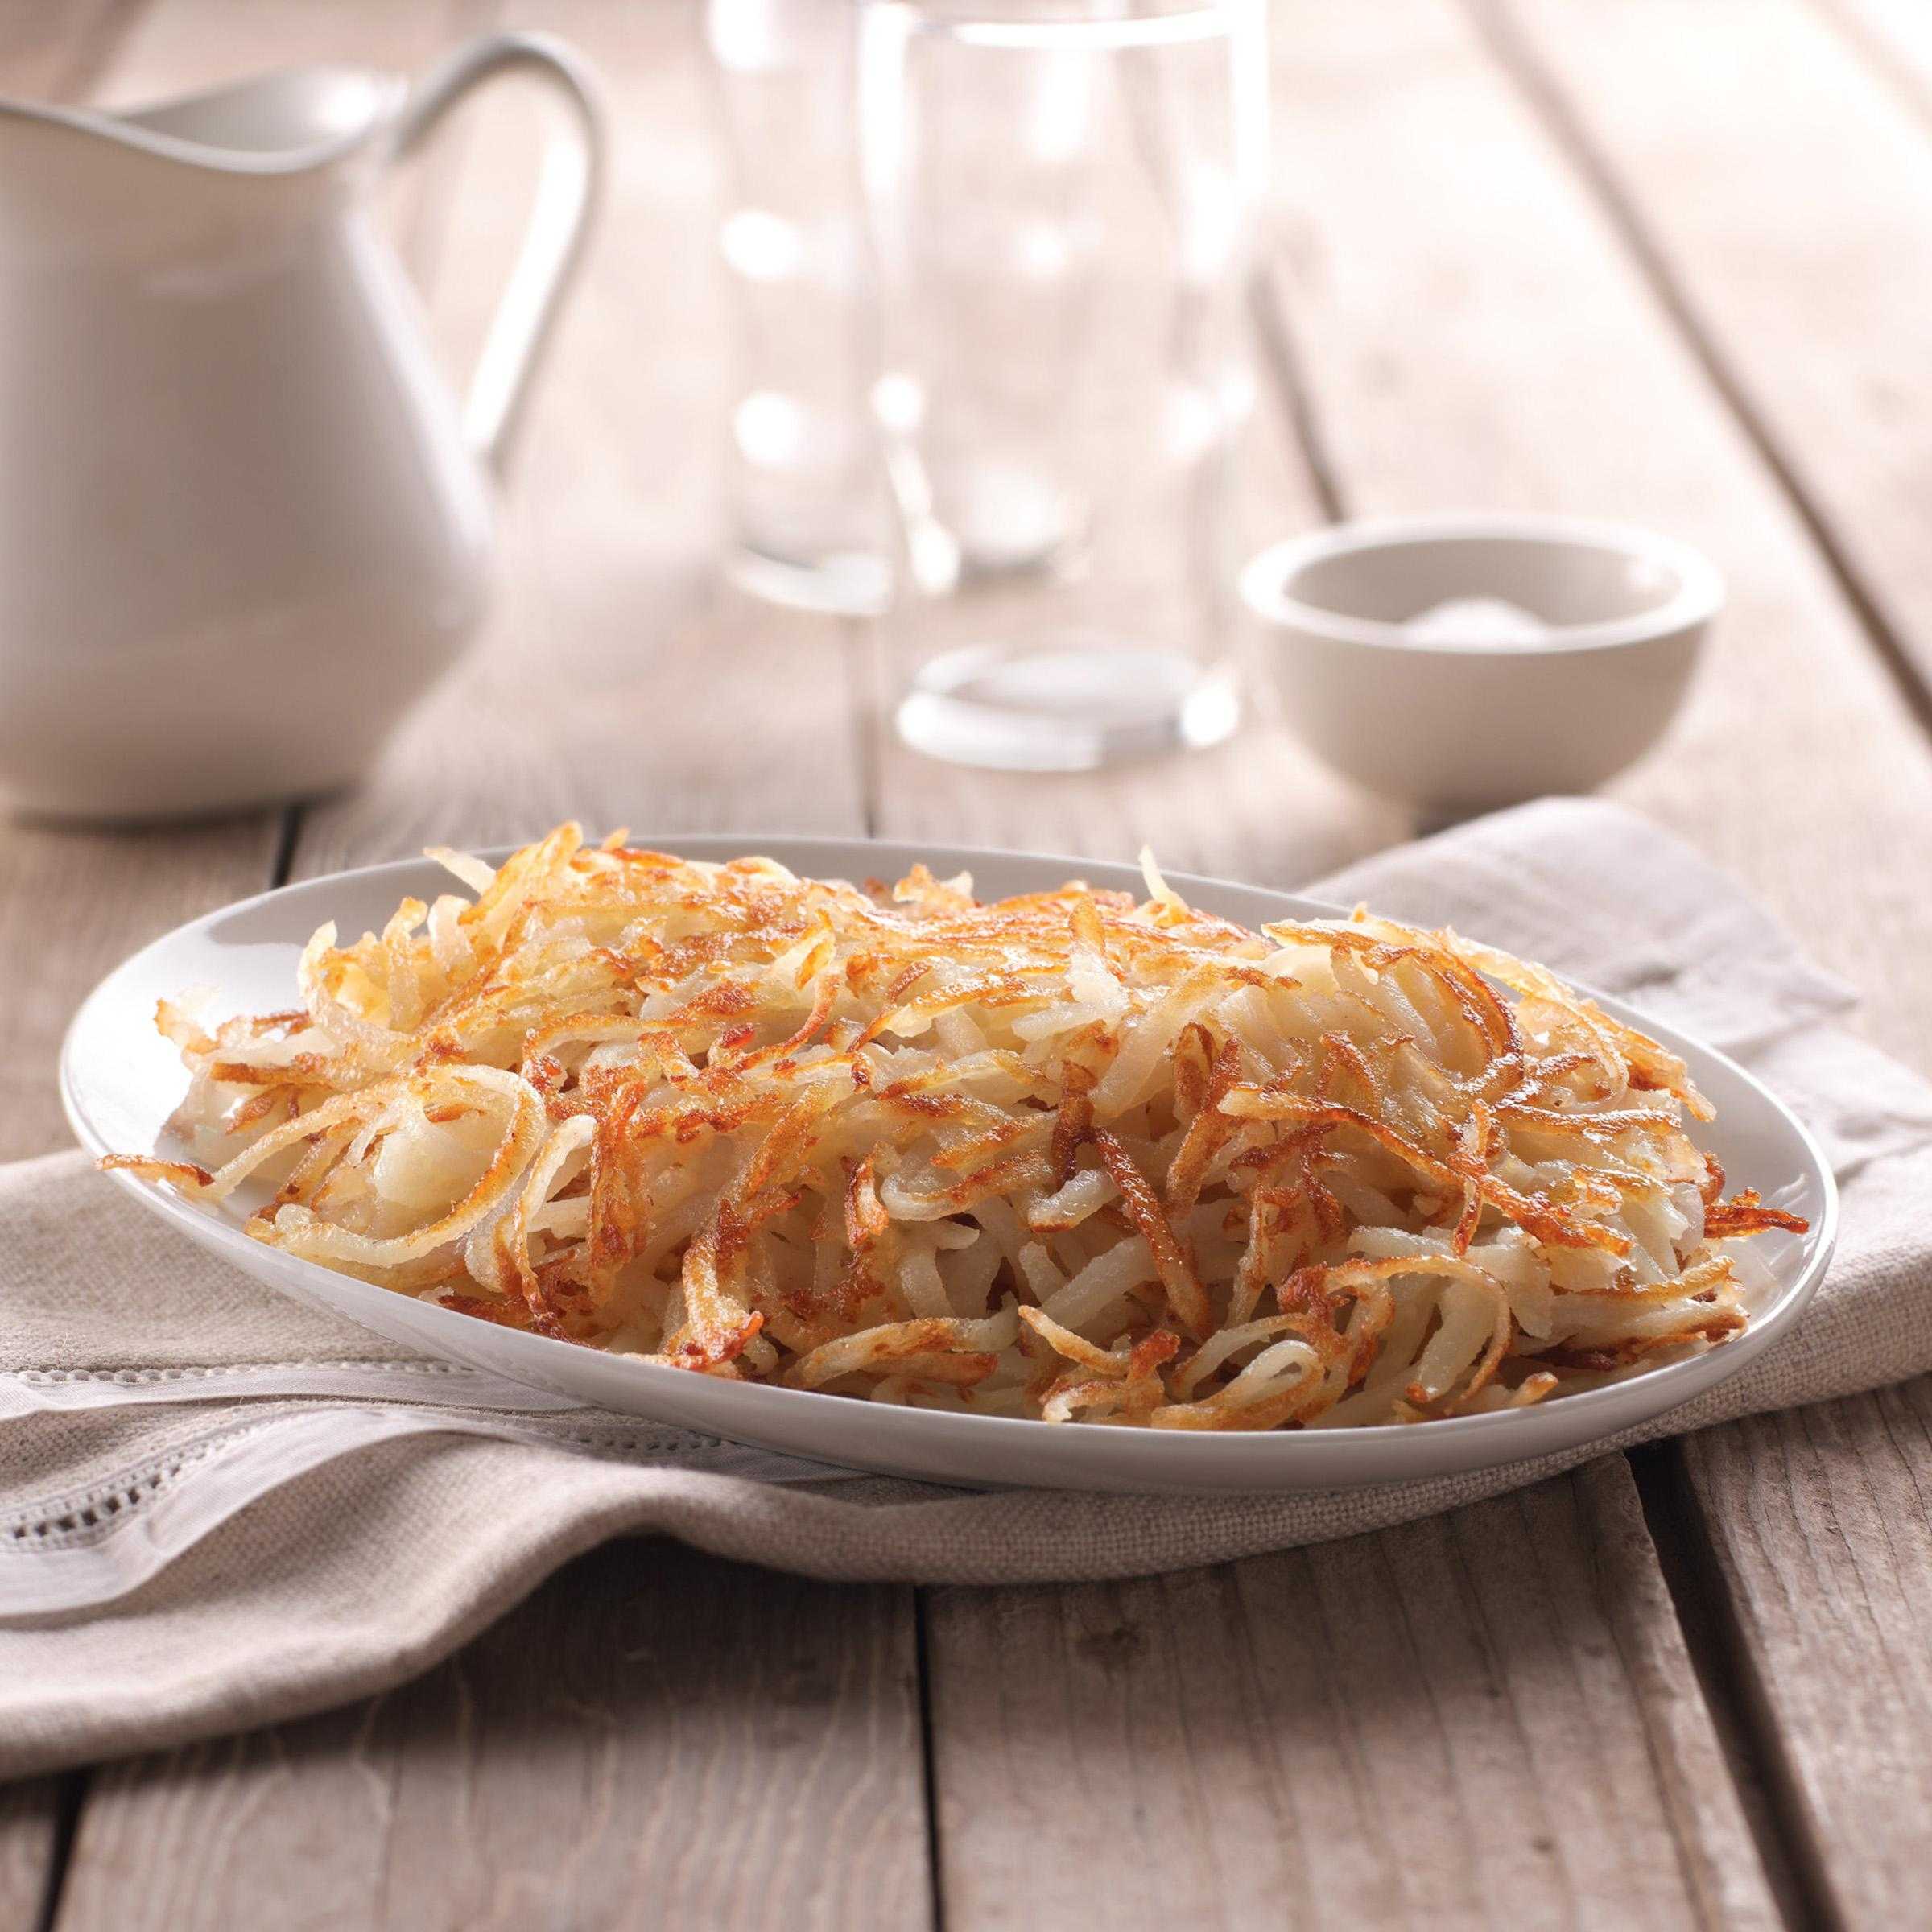 Simply Potatoes® Refrigerated Shredded Hash Browns made with peeled Russet potatoes shredded 3/16